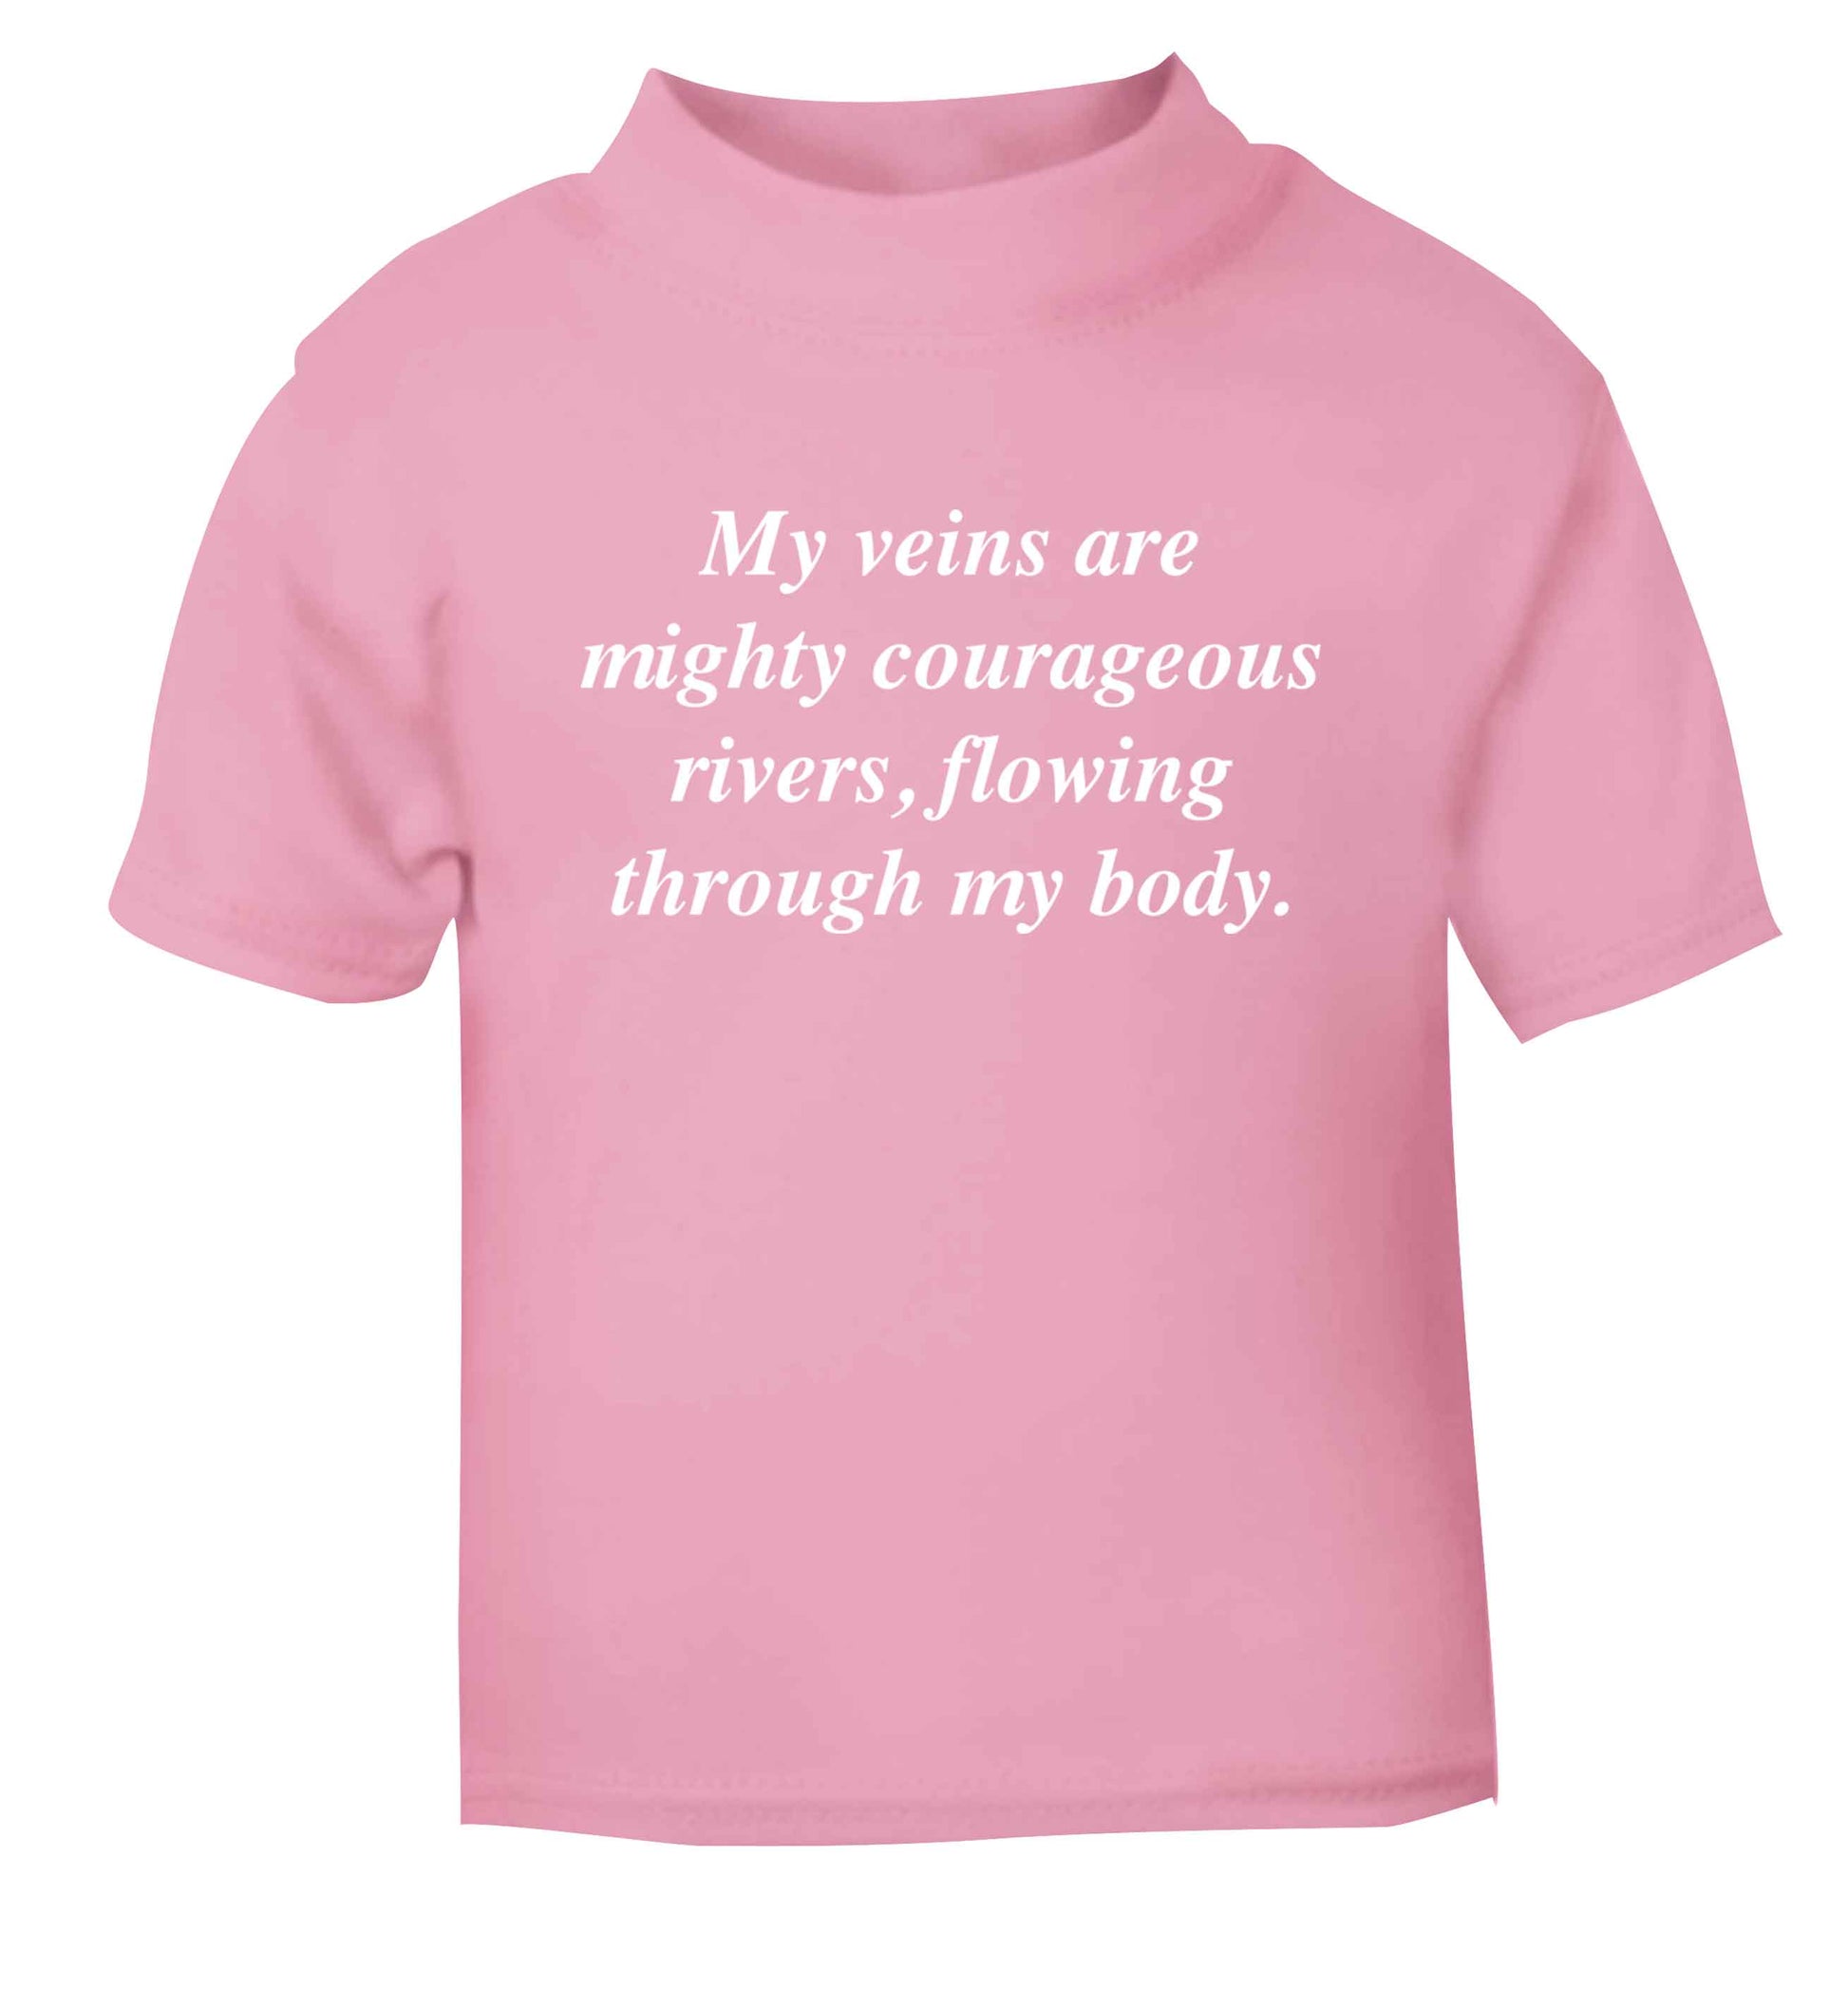 My veins are mighty courageous rivers, flowing through my body light pink baby toddler Tshirt 2 Years